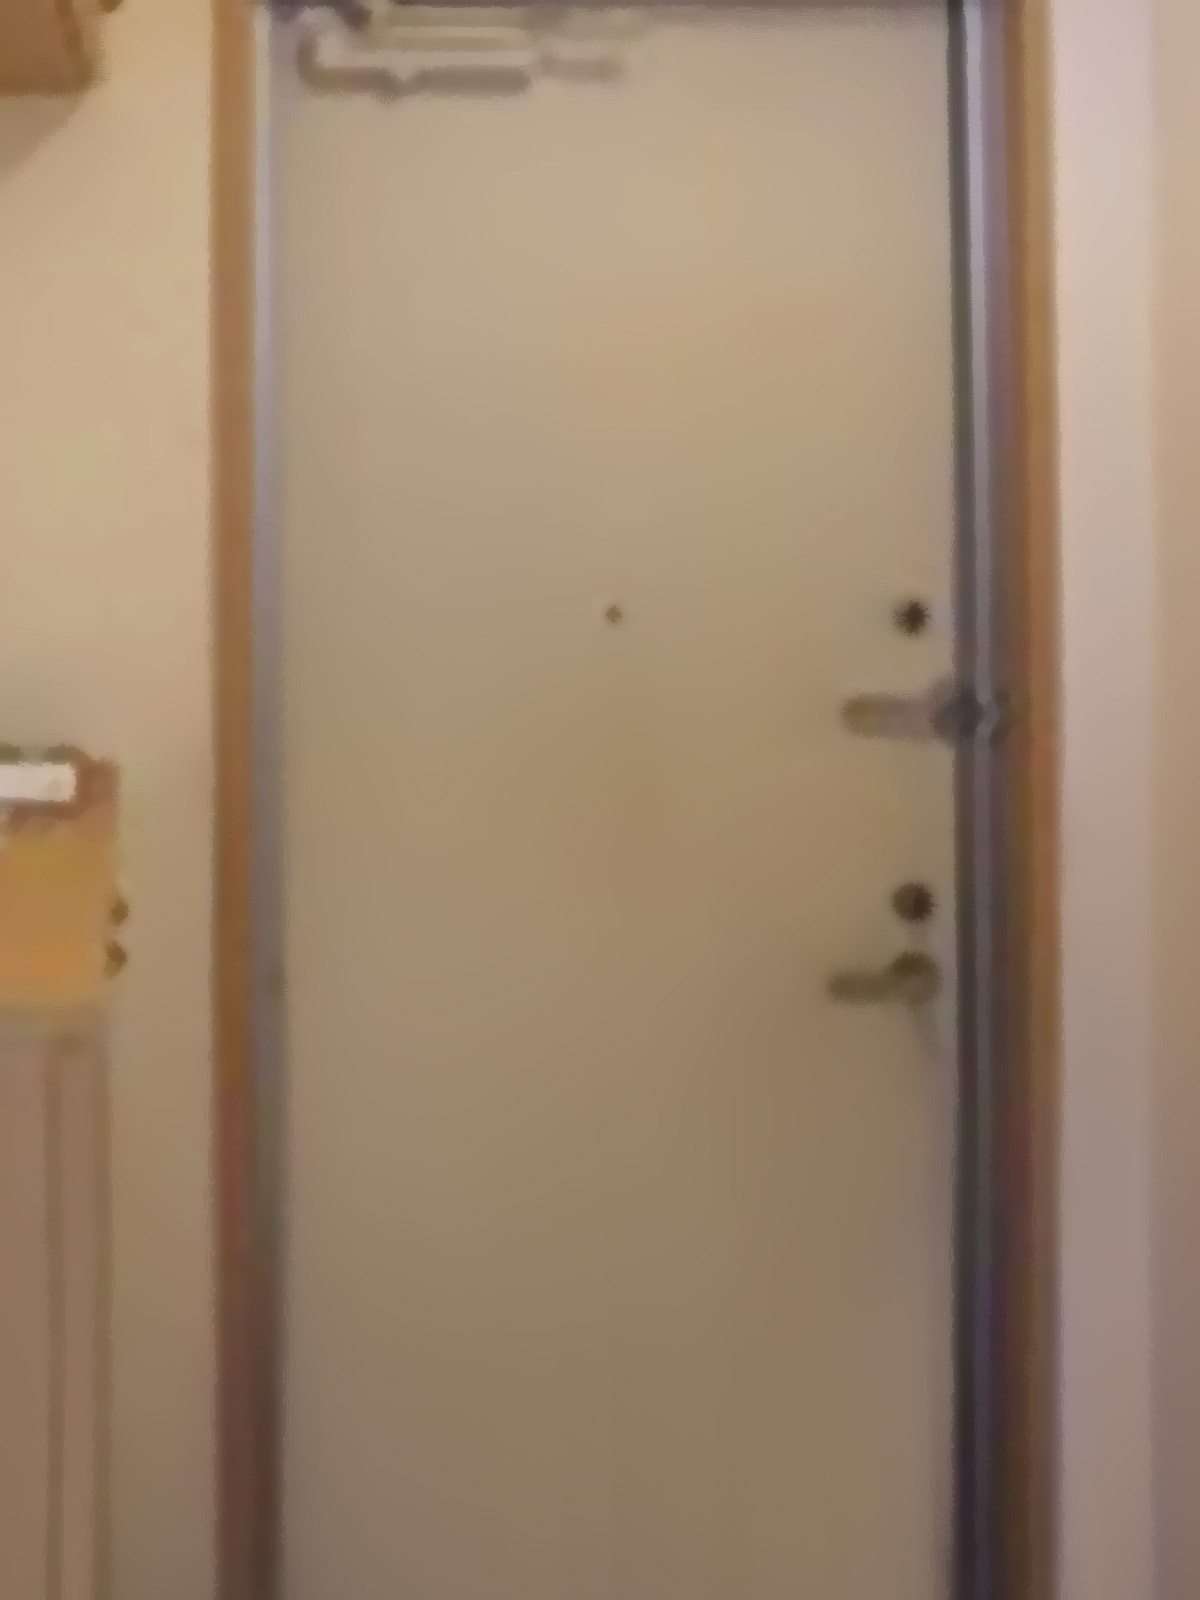 High Quality Blurred out Door Hallway Blank Meme Template